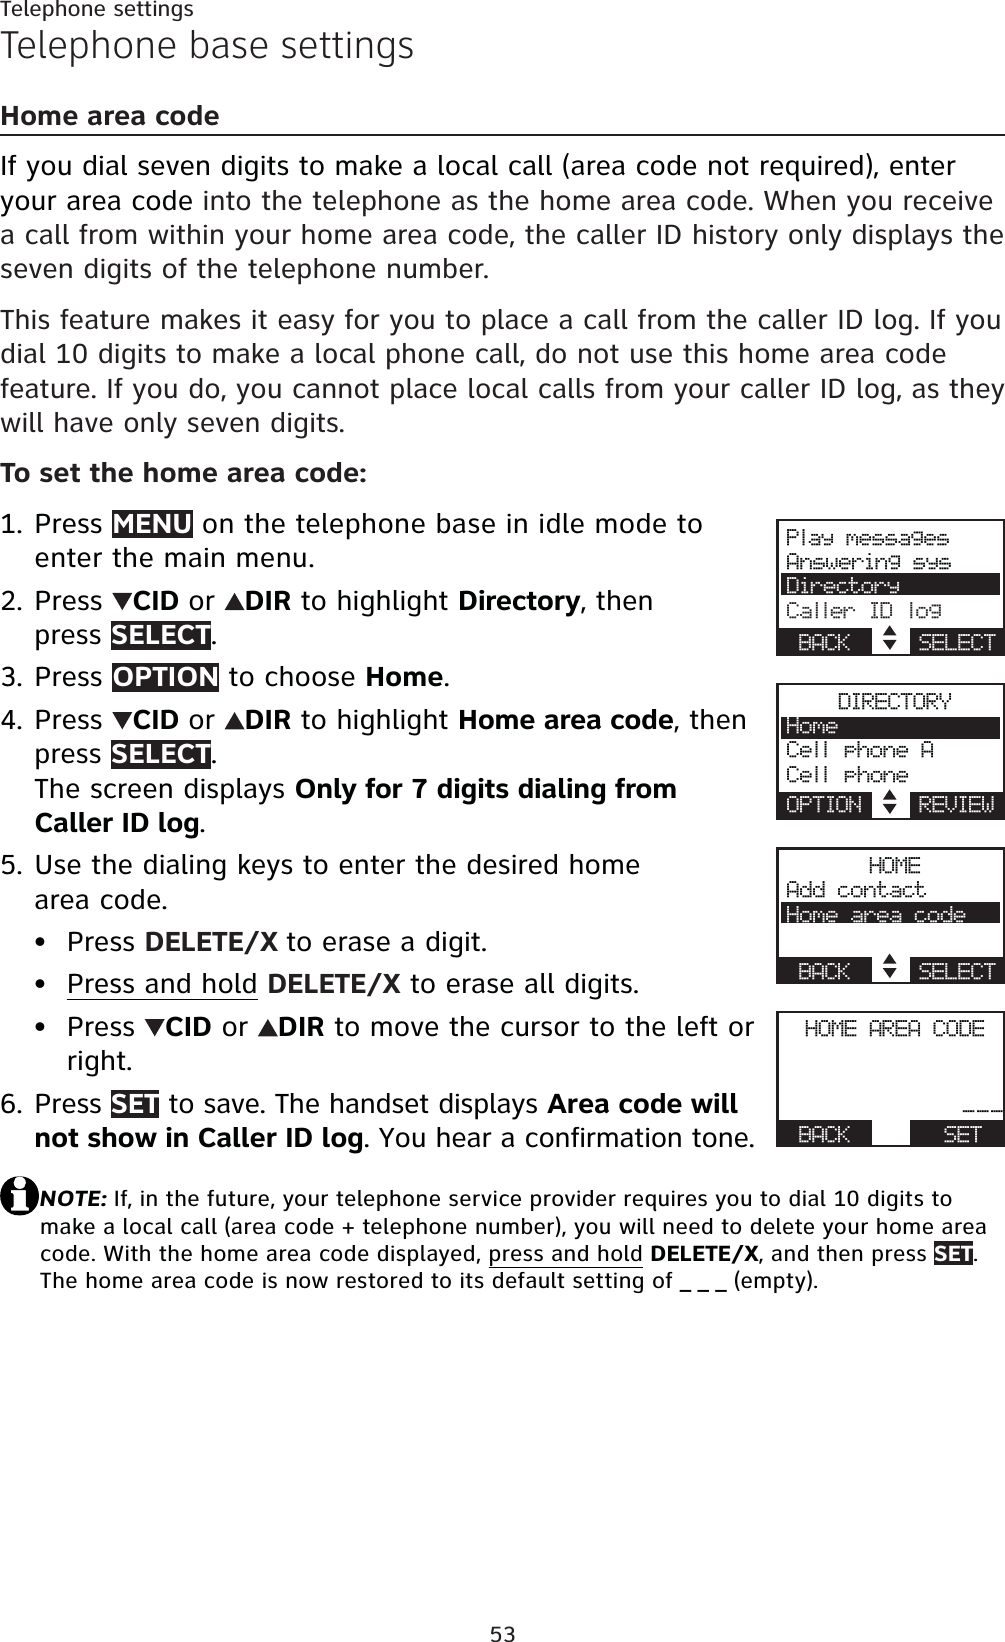 53Telephone settingsTelephone base settingsHome area codeIf you dial seven digits to make a local call (area code not required), enter your area code into the telephone as the home area code. When you receive a call from within your home area code, the caller ID history only displays the seven digits of the telephone number.This feature makes it easy for you to place a call from the caller ID log. If you dial 10 digits to make a local phone call, do not use this home area code feature. If you do, you cannot place local calls from your caller ID log, as they will have only seven digits.To set the home area code:Press MENU on the telephone base in idle mode to enter the main menu.Press  CID or DIR to highlight Directory, then press SELECT.Press OPTION to choose Home.Press  CID or DIR to highlight Home area code, then press SELECT.The screen displays Only for 7 digits dialing from Caller ID log.Use the dialing keys to enter the desired home area code.Press DELETE/X to erase a digit.Press and hold DELETE/X to erase all digits.Press  CID or  DIR to move the cursor to the left or right.Press SET to save. The handset displays Area code will not show in Caller ID log. You hear a confirmation tone.NOTE: If, in the future, your telephone service provider requires you to dial 10 digits to make a local call (area code + telephone number), you will need to delete your home area code. With the home area code displayed, press and holdDELETE/X, and then press SET.The home area code is now restored to its default setting of _ _ _ (empty).1.2.3.4.5.•••6.Play messagesAnswering sysDirectoryCaller ID logBACK    SELECTDIRECTORYHomeCell phone ACell phoneOPTION    REVIEWHOMEAdd contactHome area codeBACK    SELECTHOME AREA CODEActive devices___BACK      SET